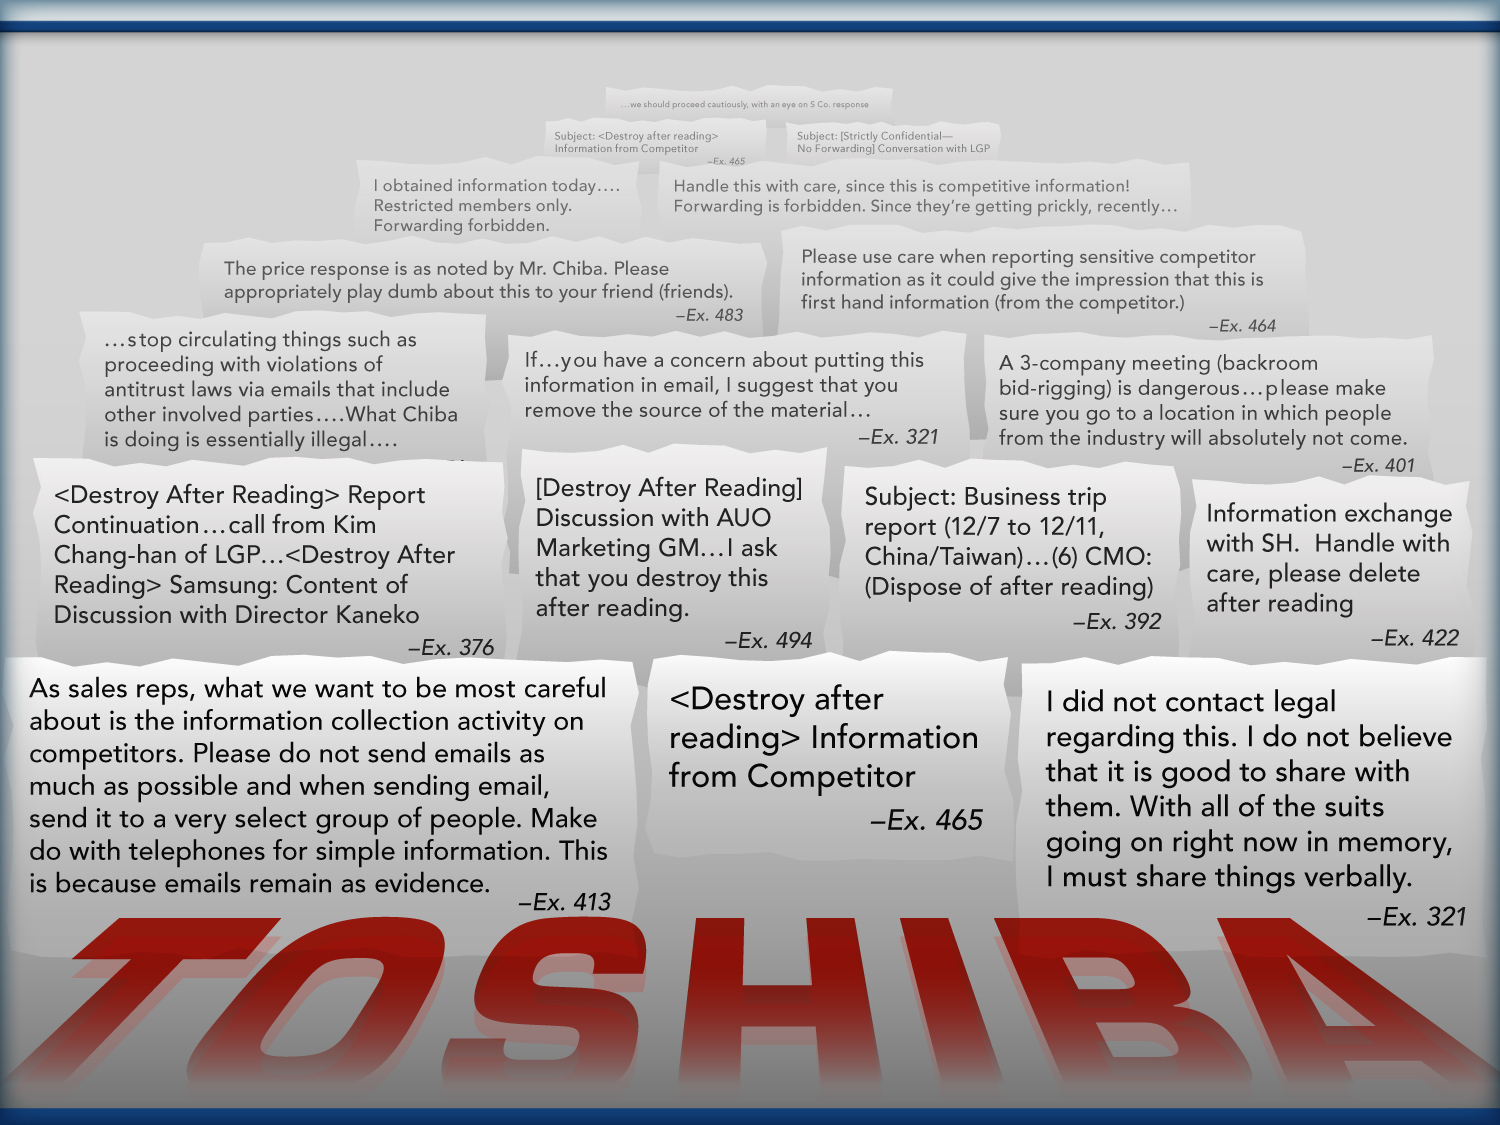 Toshiba in red at bottom, various excerpts above